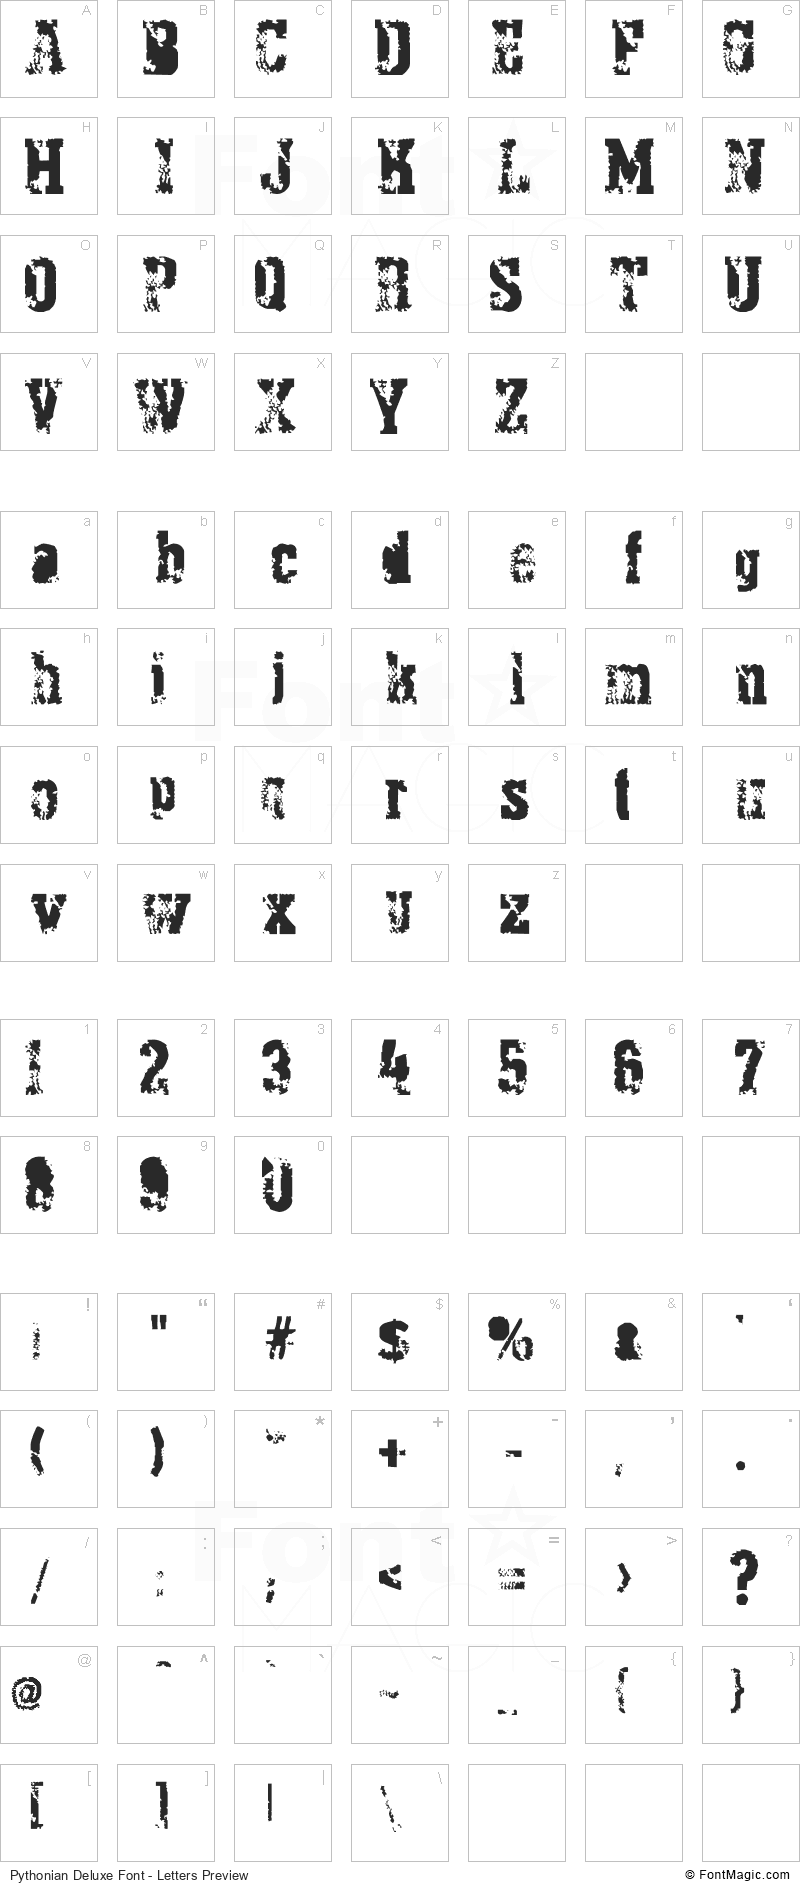 Pythonian Deluxe Font - All Latters Preview Chart